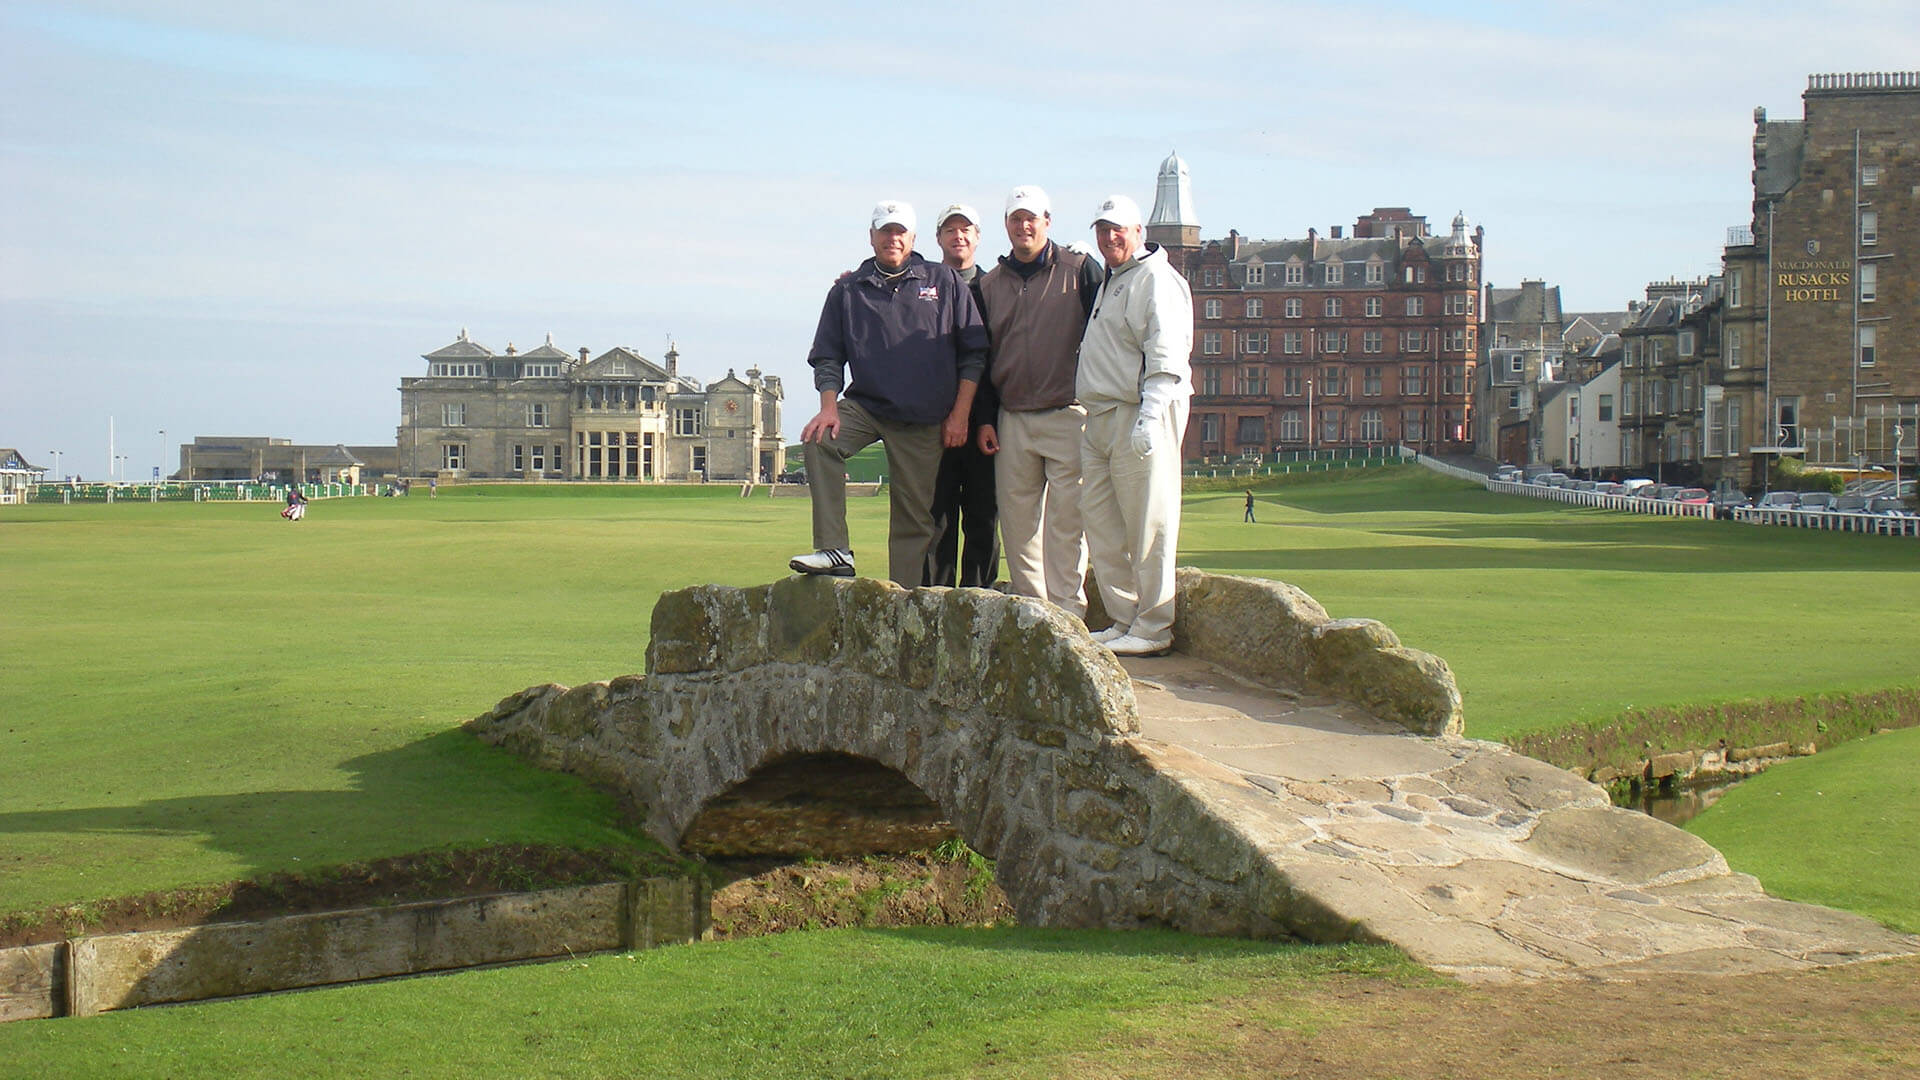 What to do when visiting St. Andrews in 2019